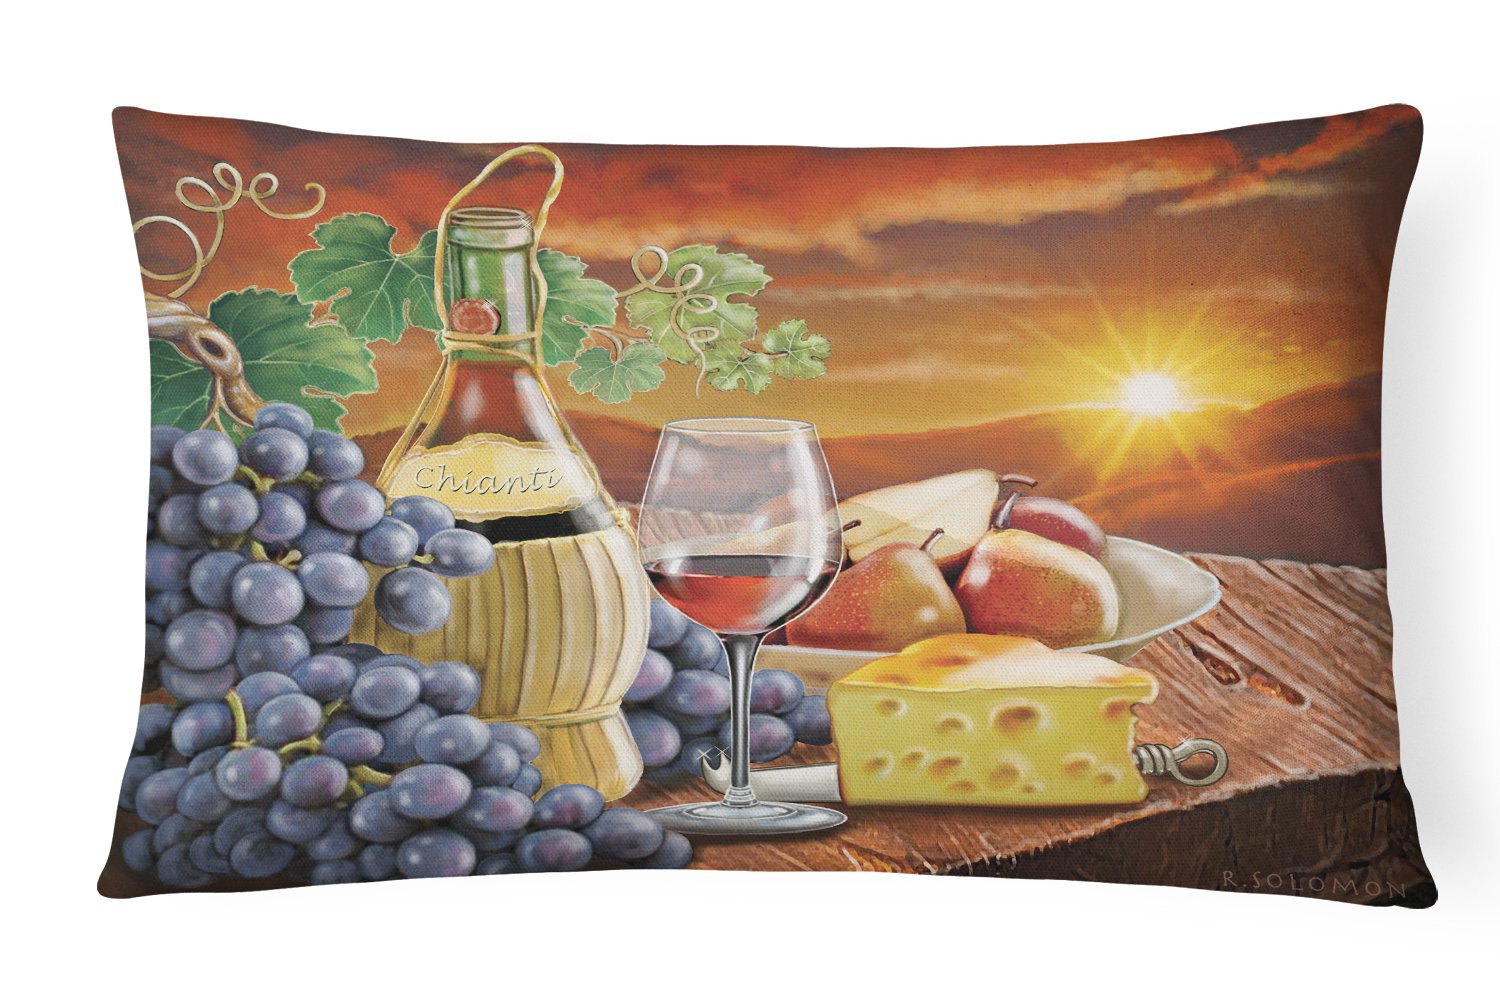 Chianti, Pears, Wine and Cheese Canvas Fabric Decorative Pillow PRS4029PW1216 by Caroline's Treasures